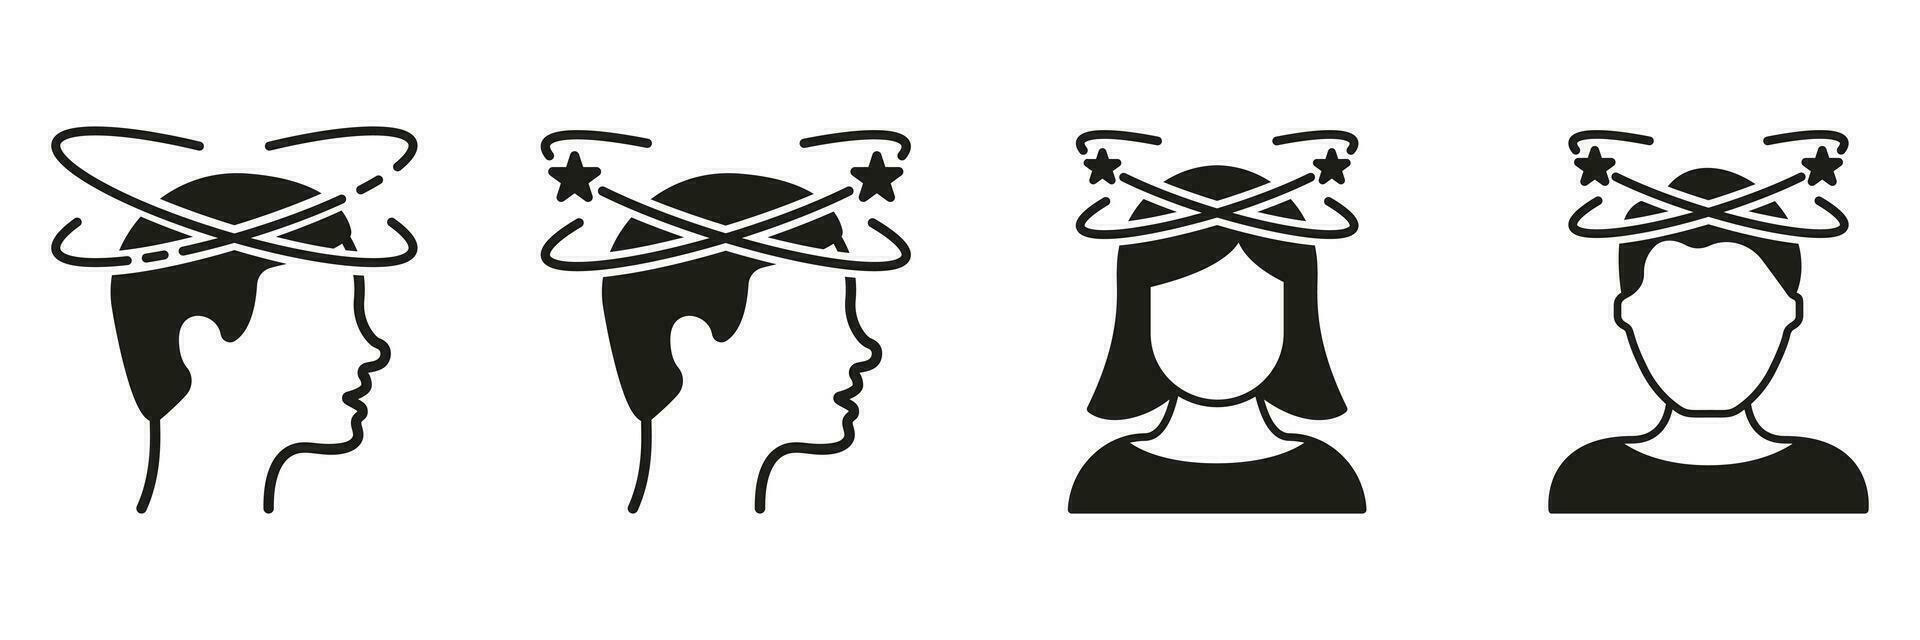 Migraine, Headache, Dizziness, Distracted Head Symbol Collection on White Background. Man and Woman Feel Dizzy Silhouette Black Icon Set. Tired People with Nausea Pictogram. Vector Illustration.